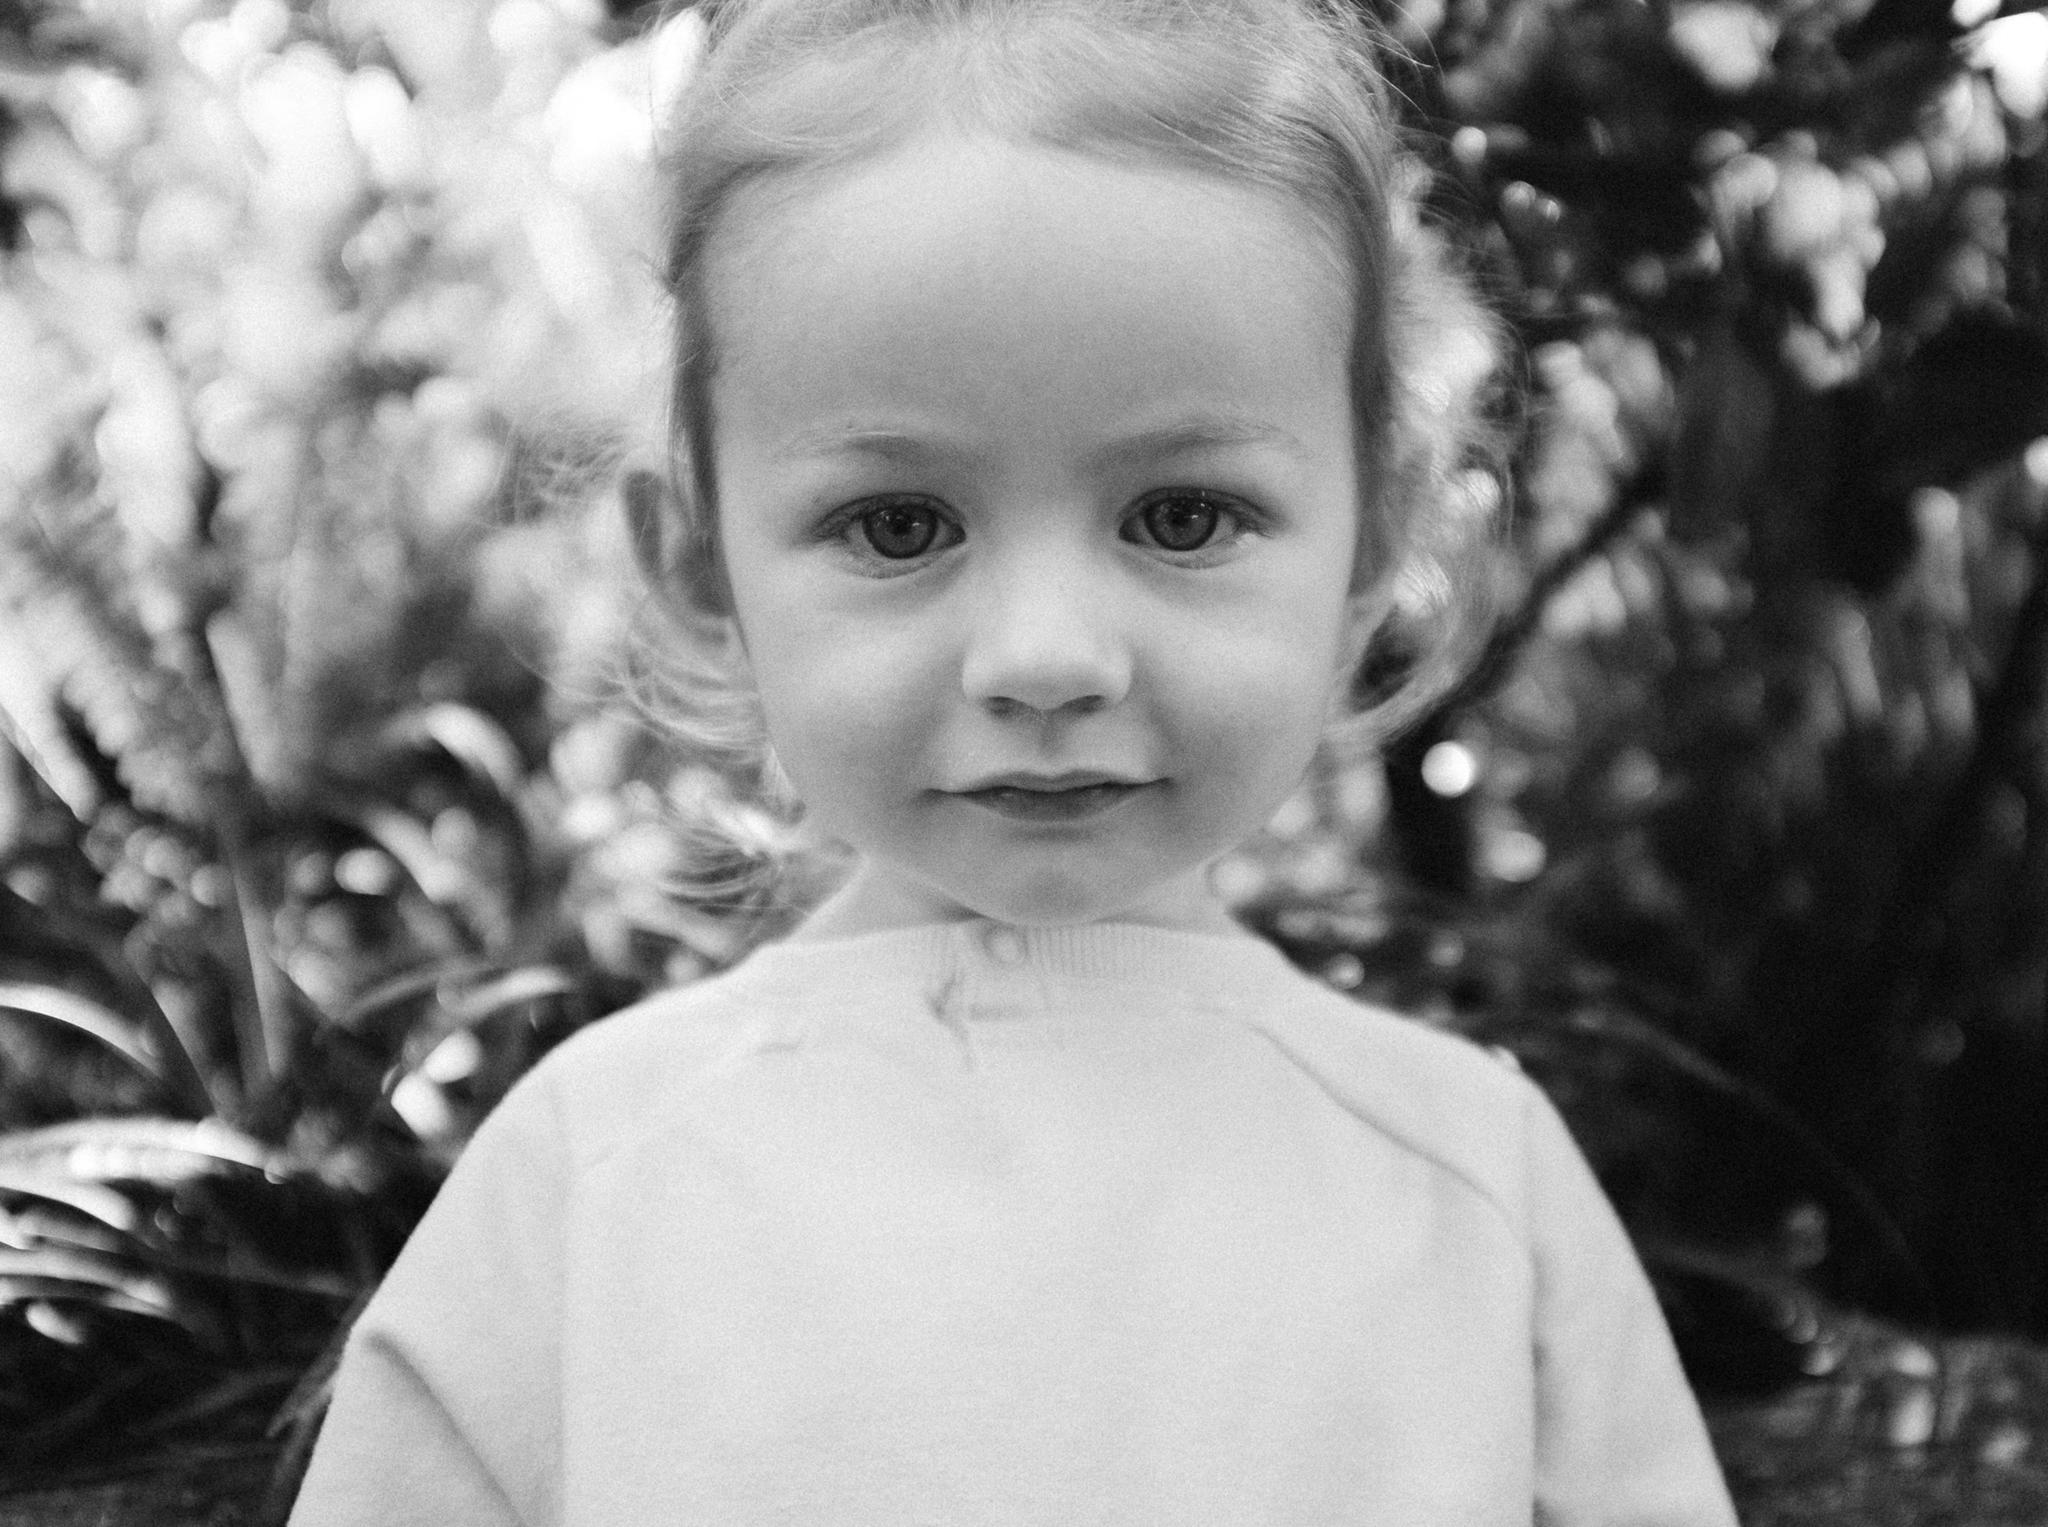 A black and white photograph of a young child with a neutral expression, standing outdoors with foliage in the background